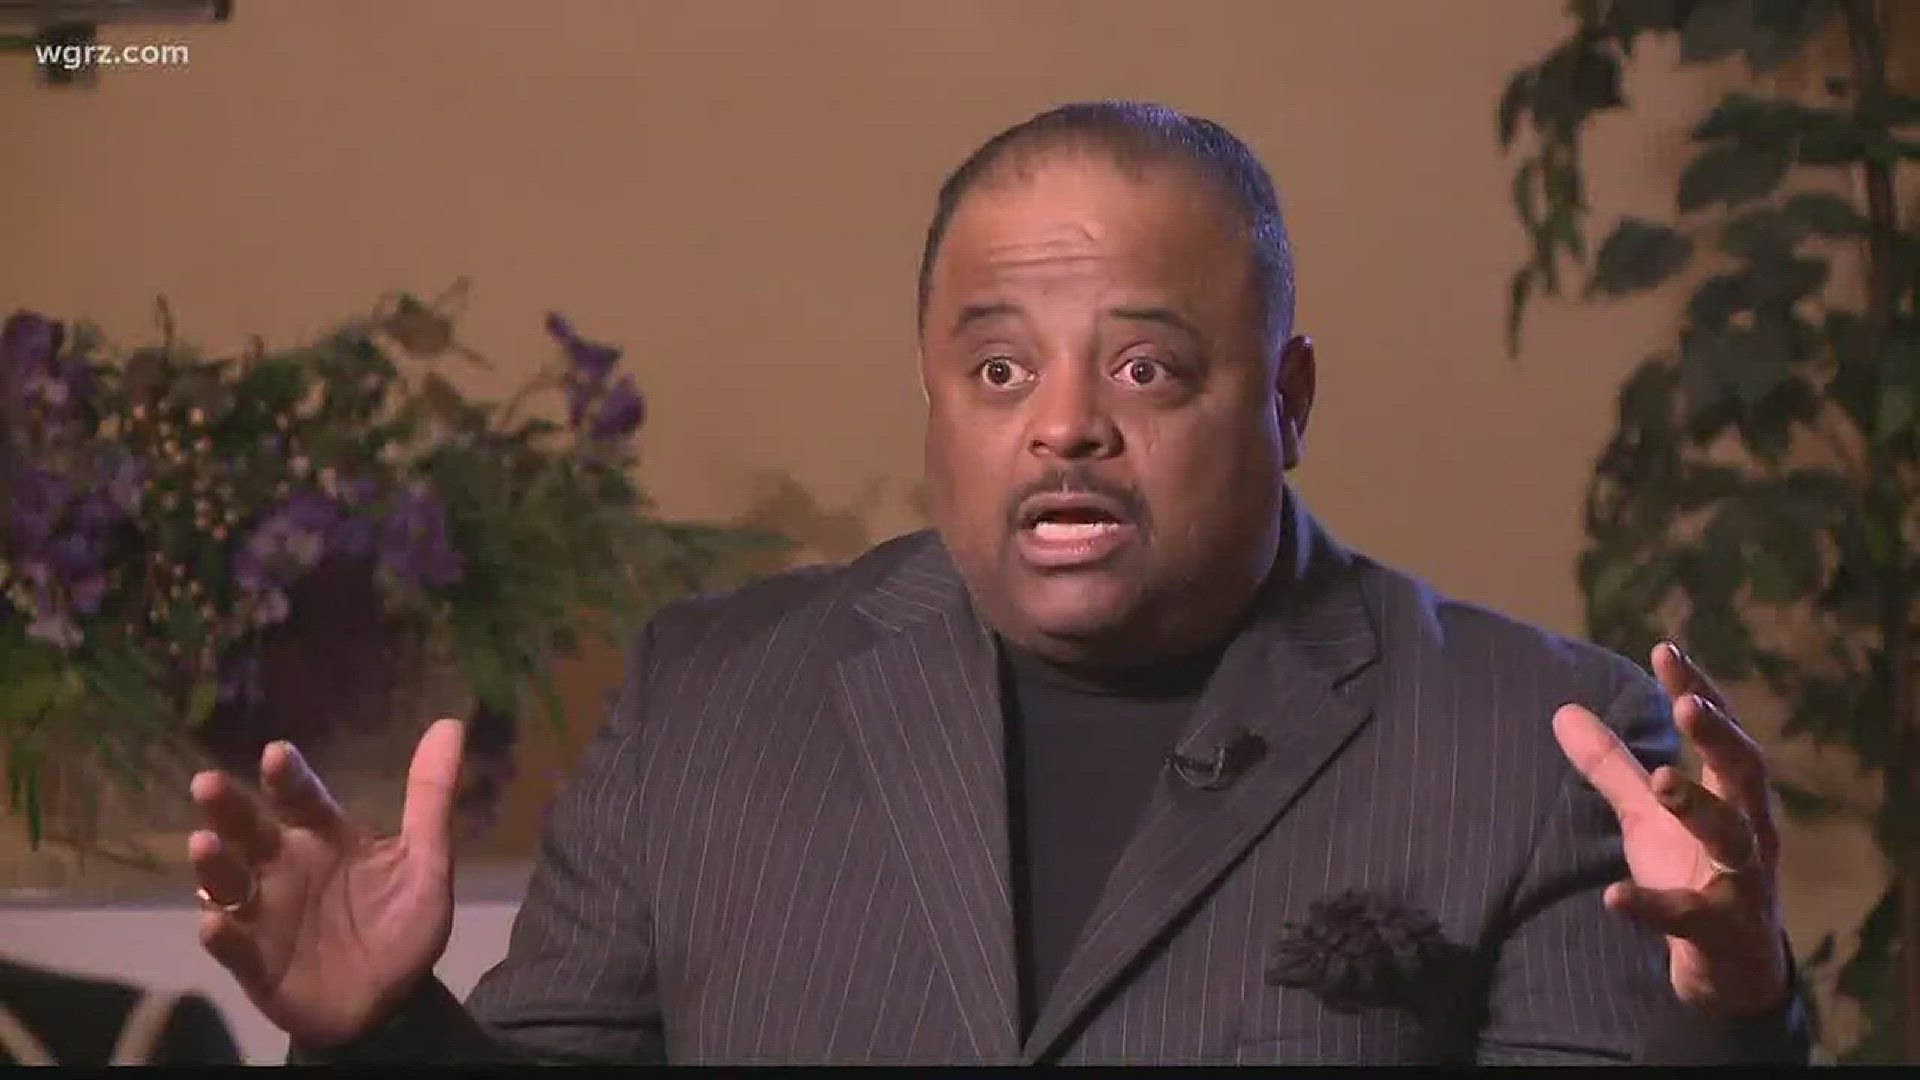 Roland Martin talked to hundreds of local high school students about education, politics and activism.